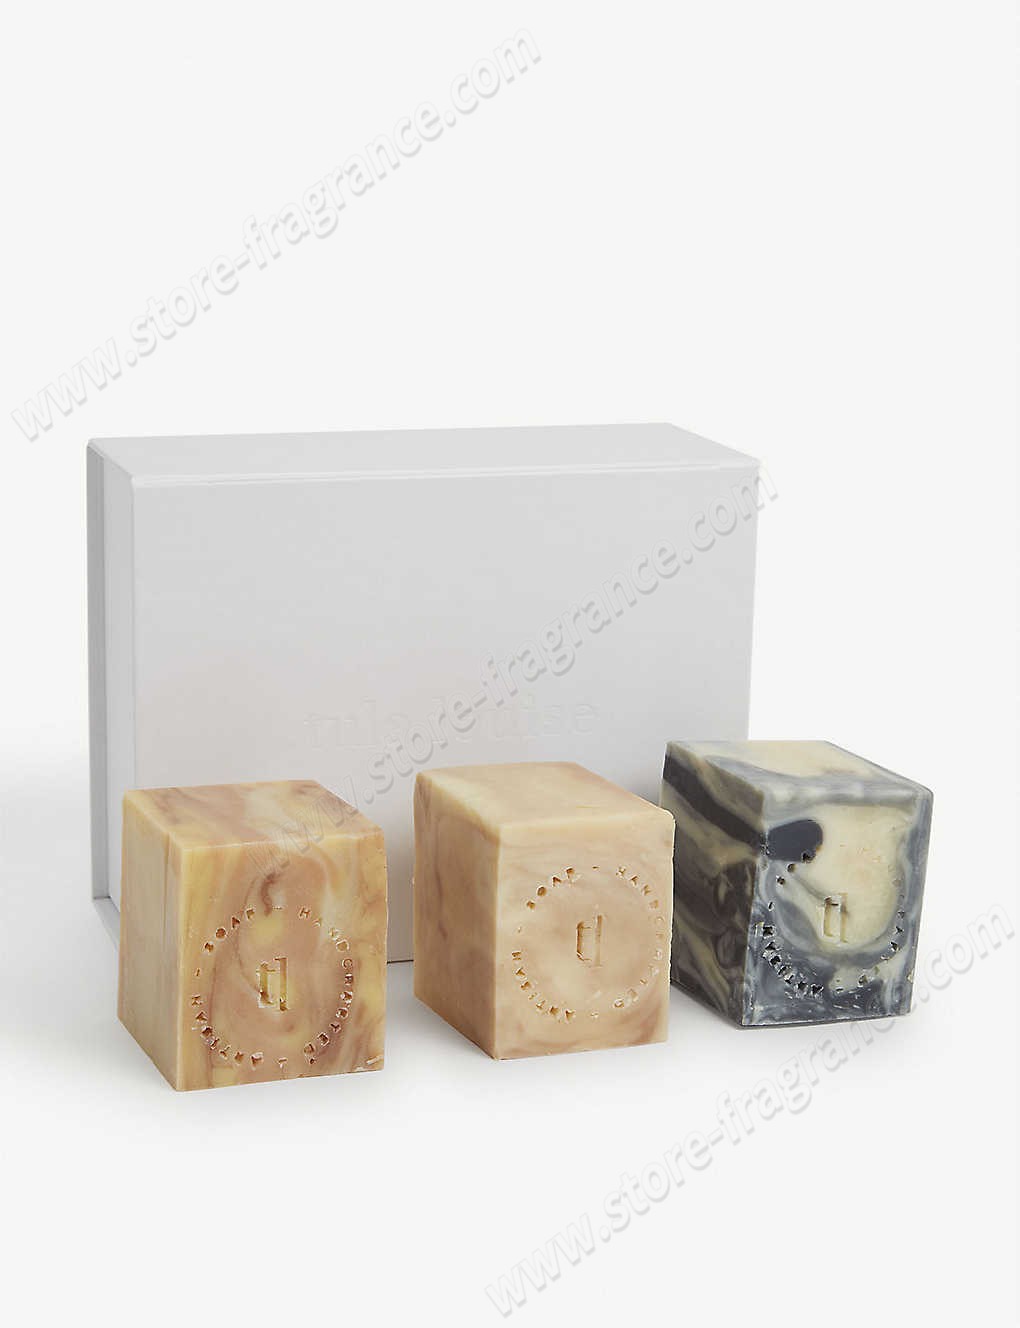 A SOUTH LONDON MAKERS MARKET/Exclusive Tula Louise marbled trio soap set ✿ Discount Store - A SOUTH LONDON MAKERS MARKET/Exclusive Tula Louise marbled trio soap set ✿ Discount Store